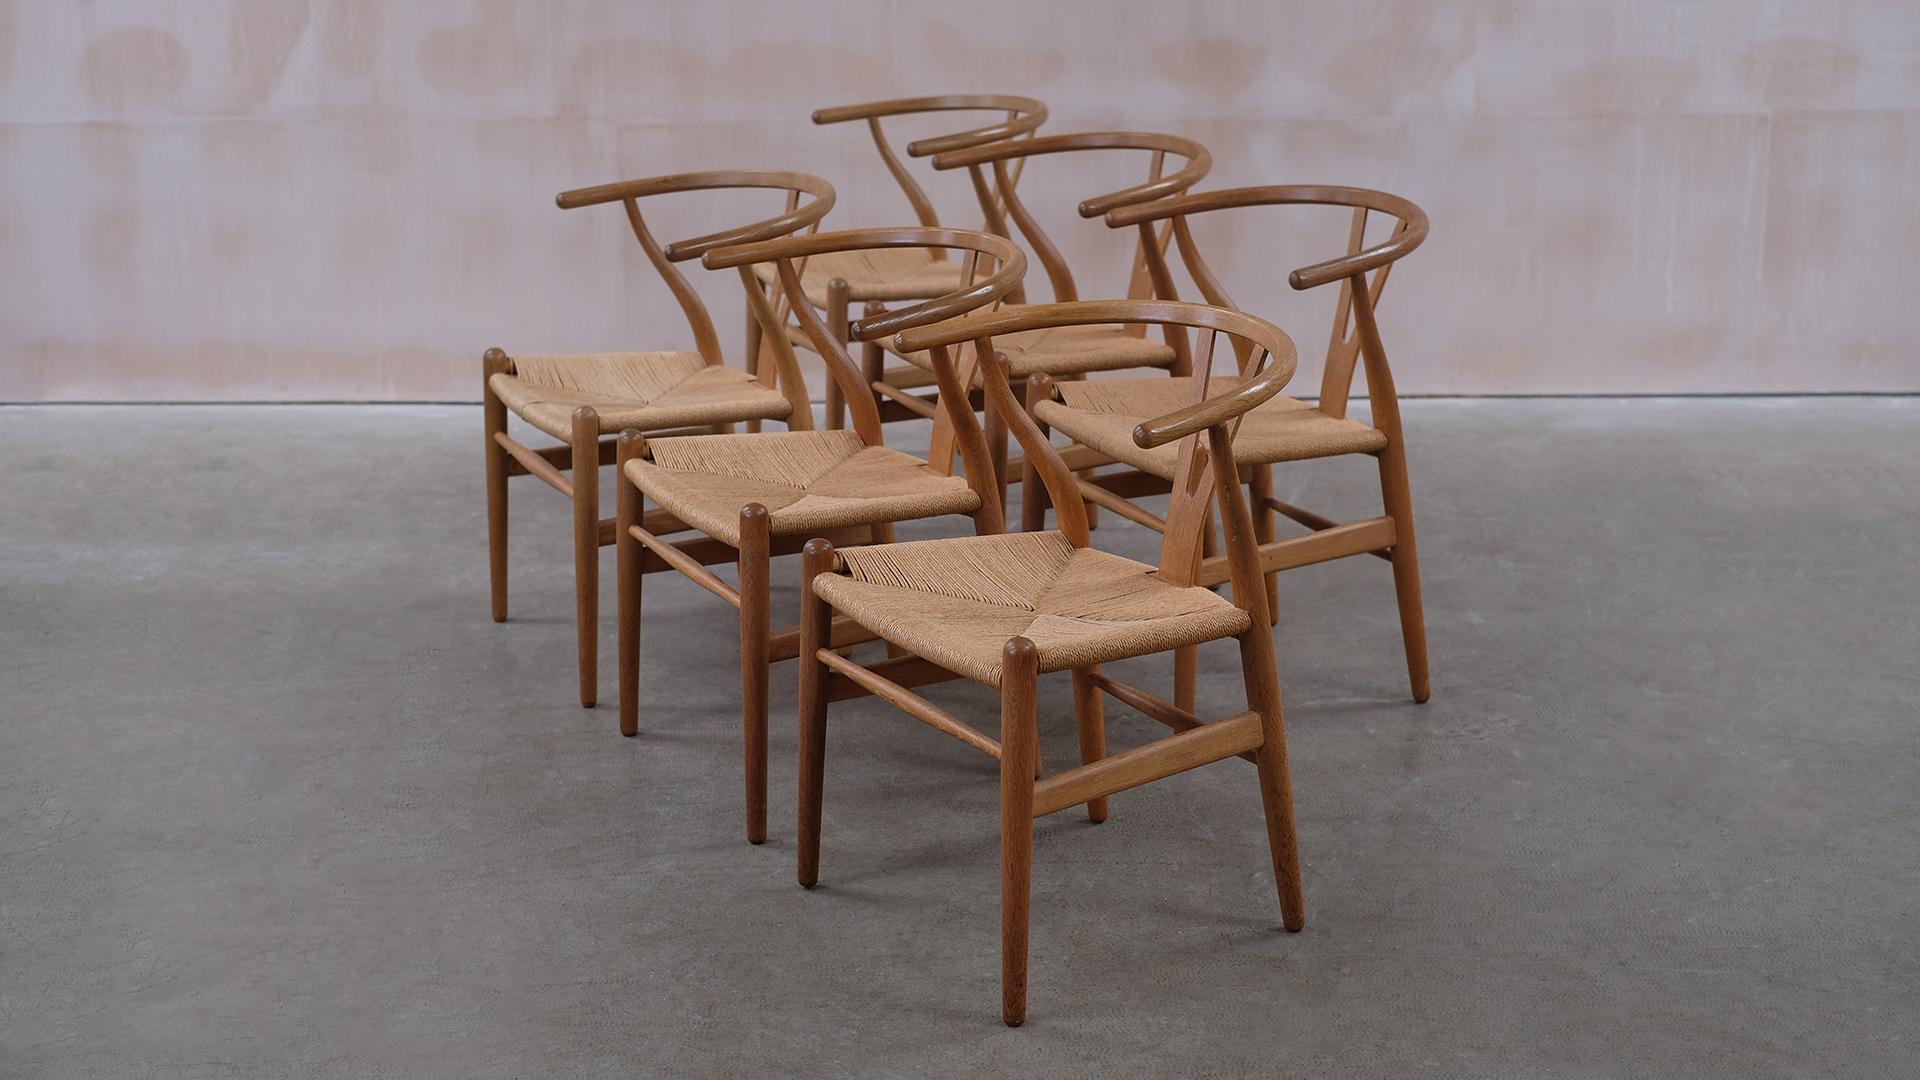 Wonderful set of 6 Wishbone chairs designed by Hans Wegner for Carl Hansen, model CH24. Beautiful condition with warm and naturally aged patina to the sculptural oak frames. Great set of Wegner's classic chair.